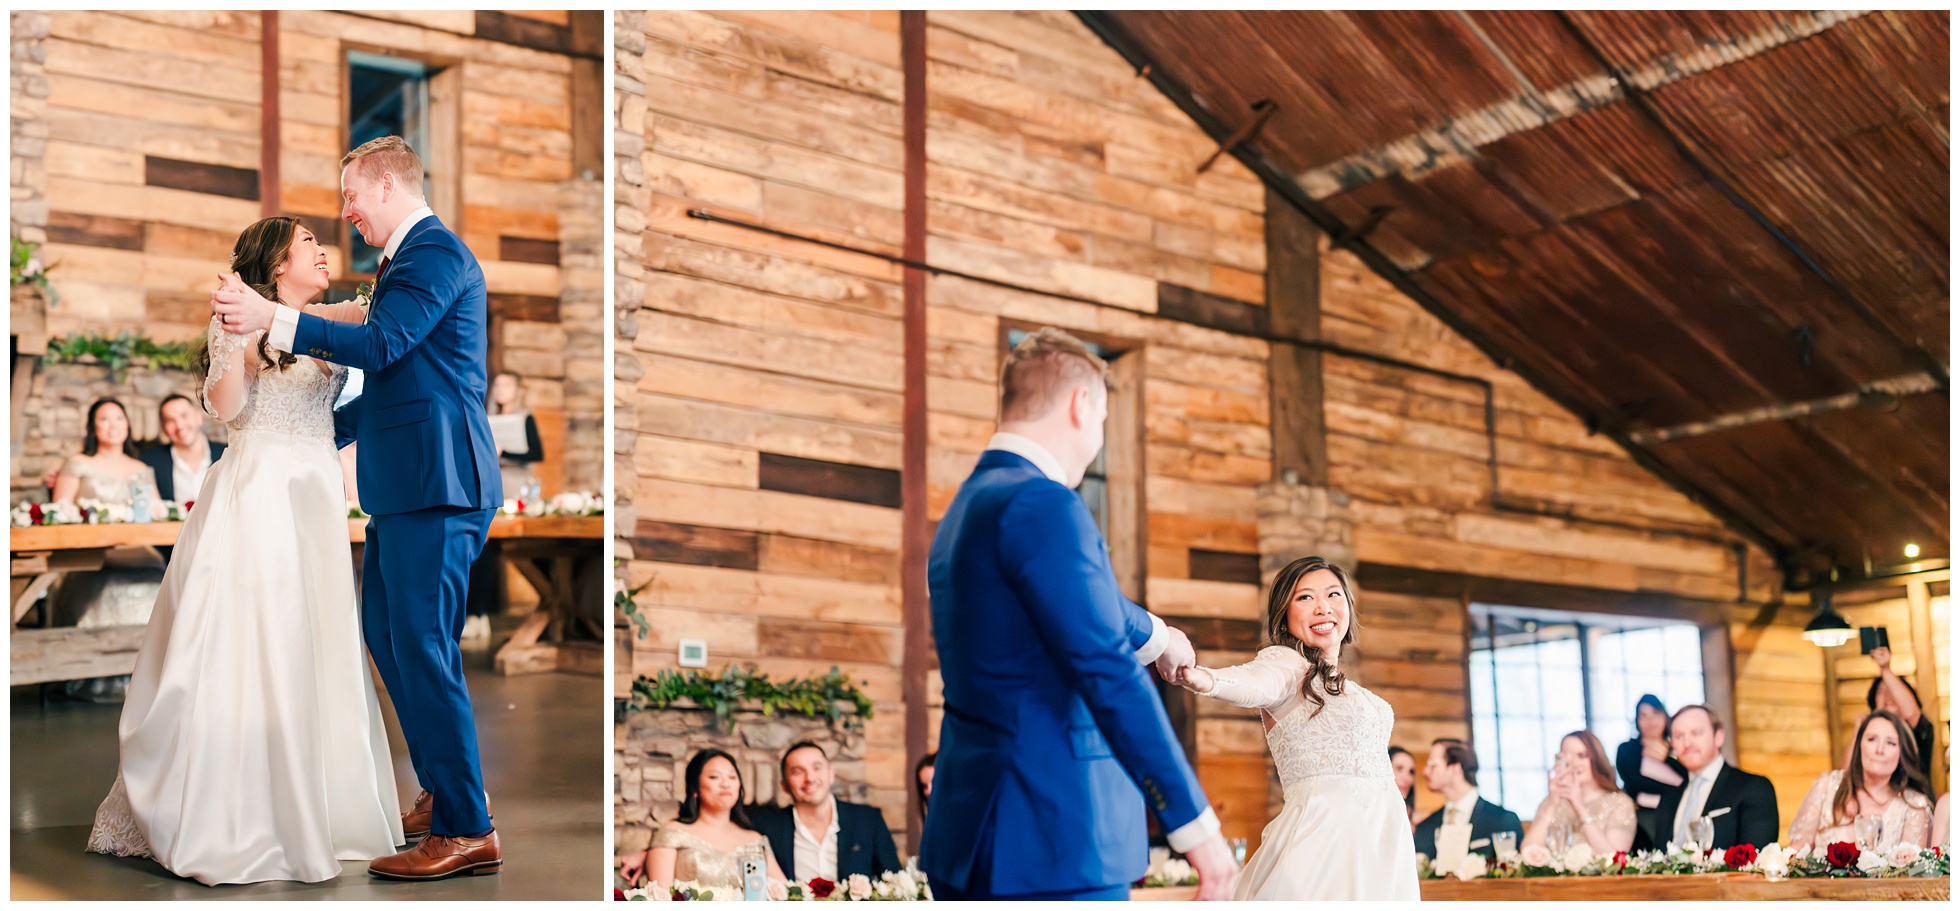 Bride and Groom first dance at Big Sky Barn, Montgomery.